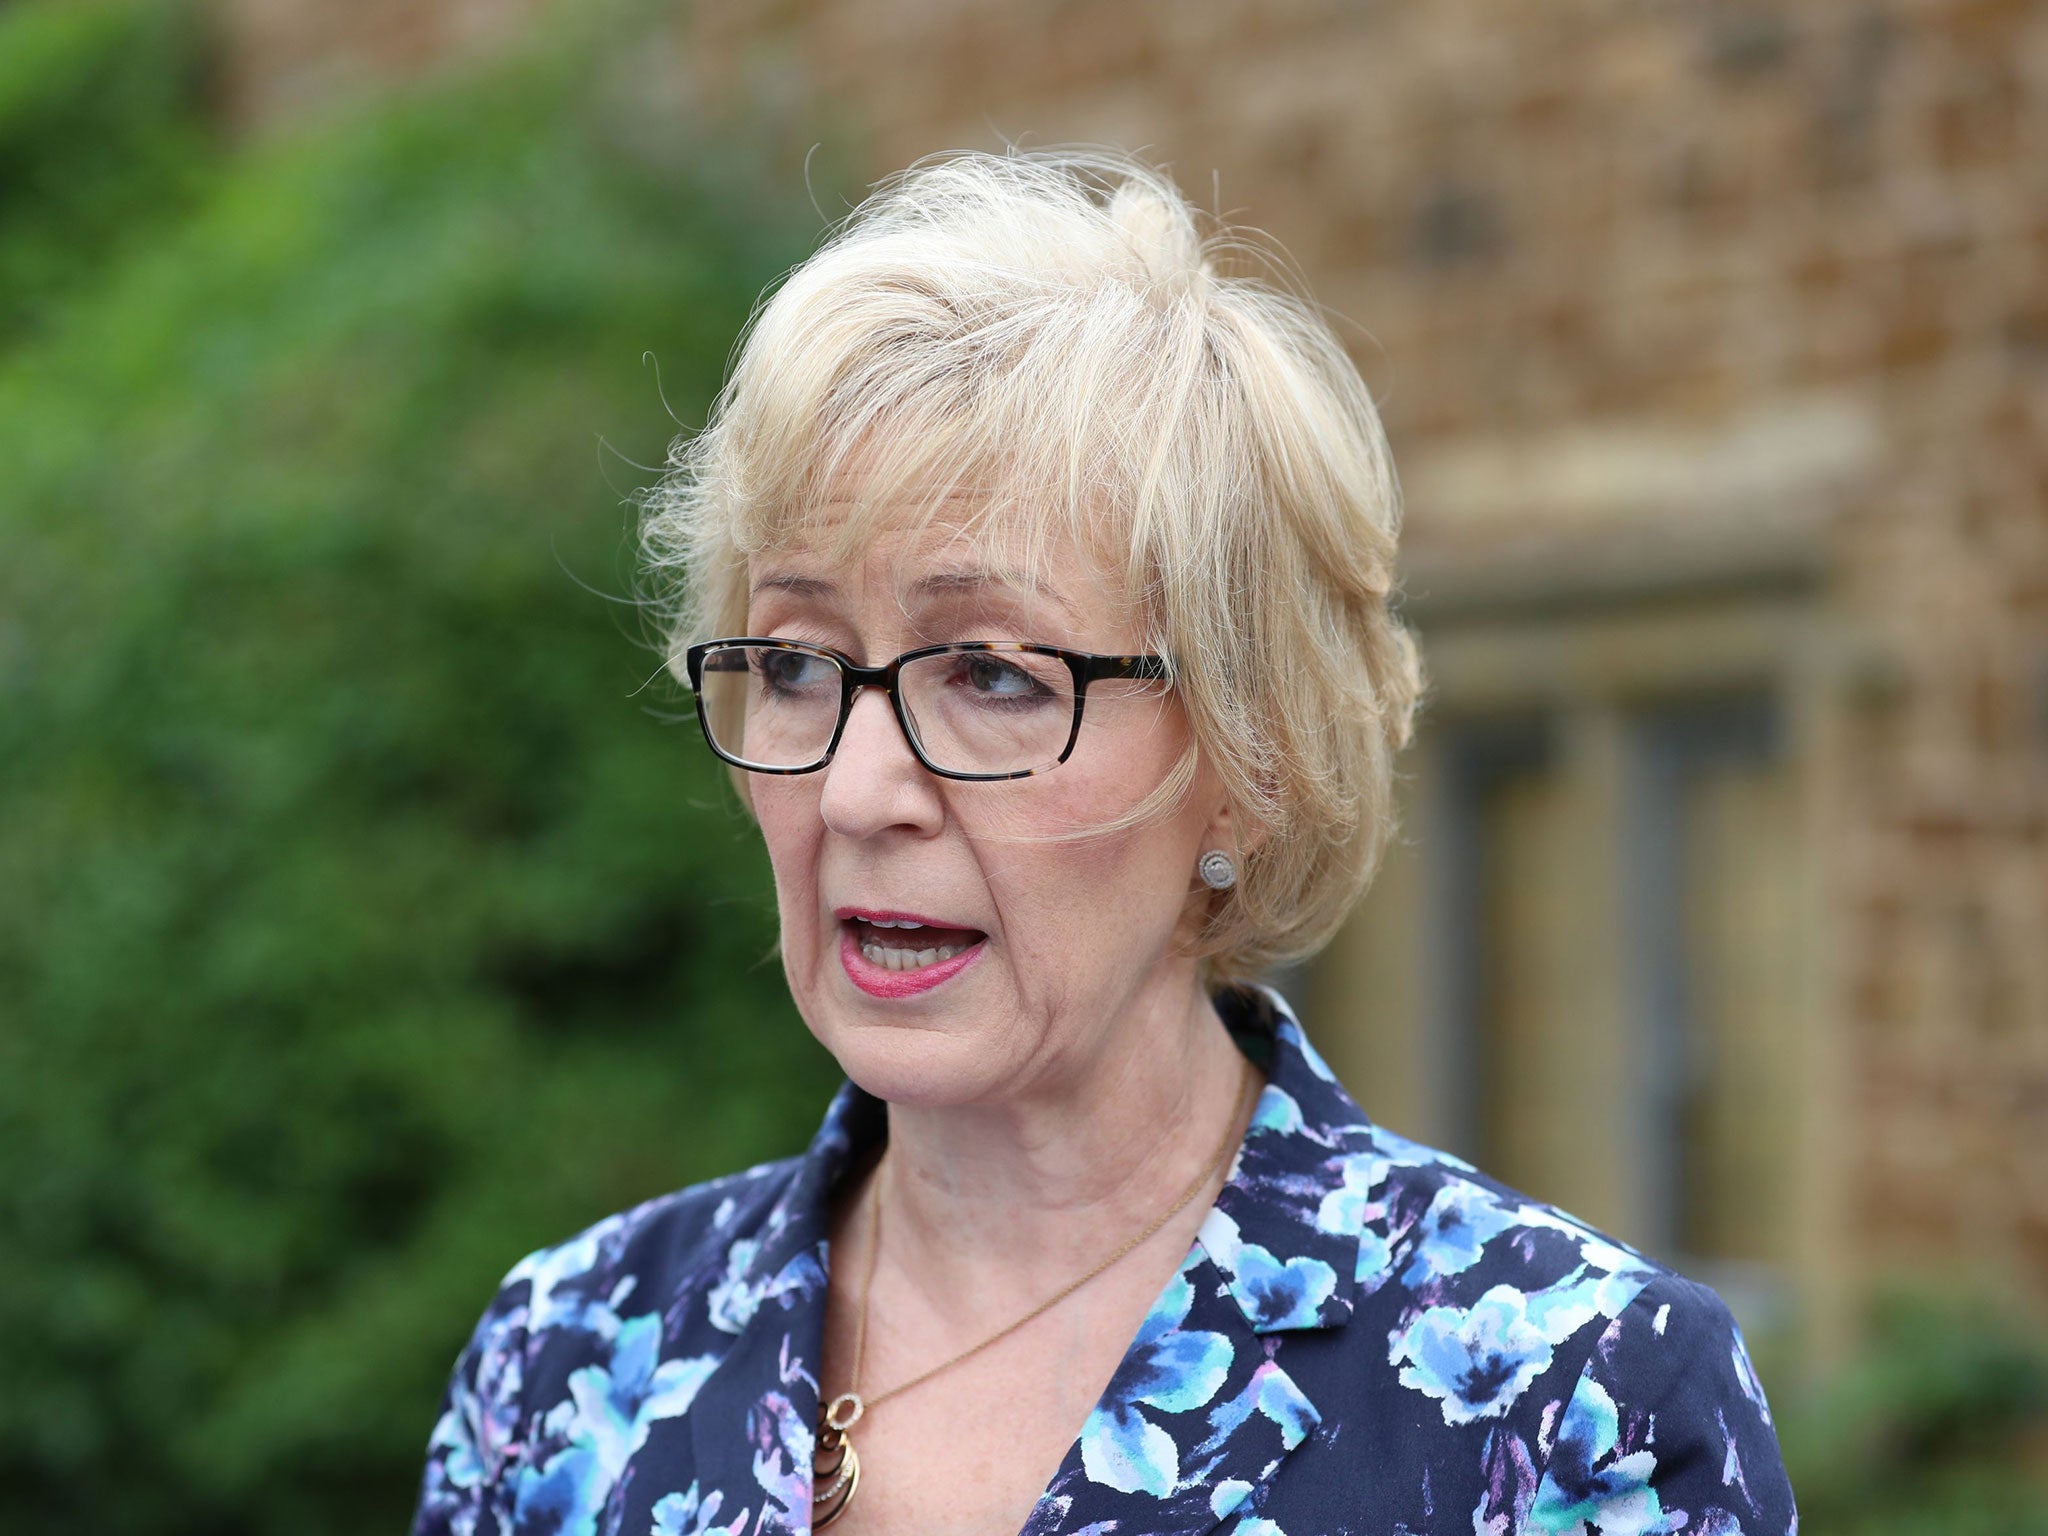 Andrea Leadsom quit the Conservative leadership race, paving the way for Theresa May to become PM